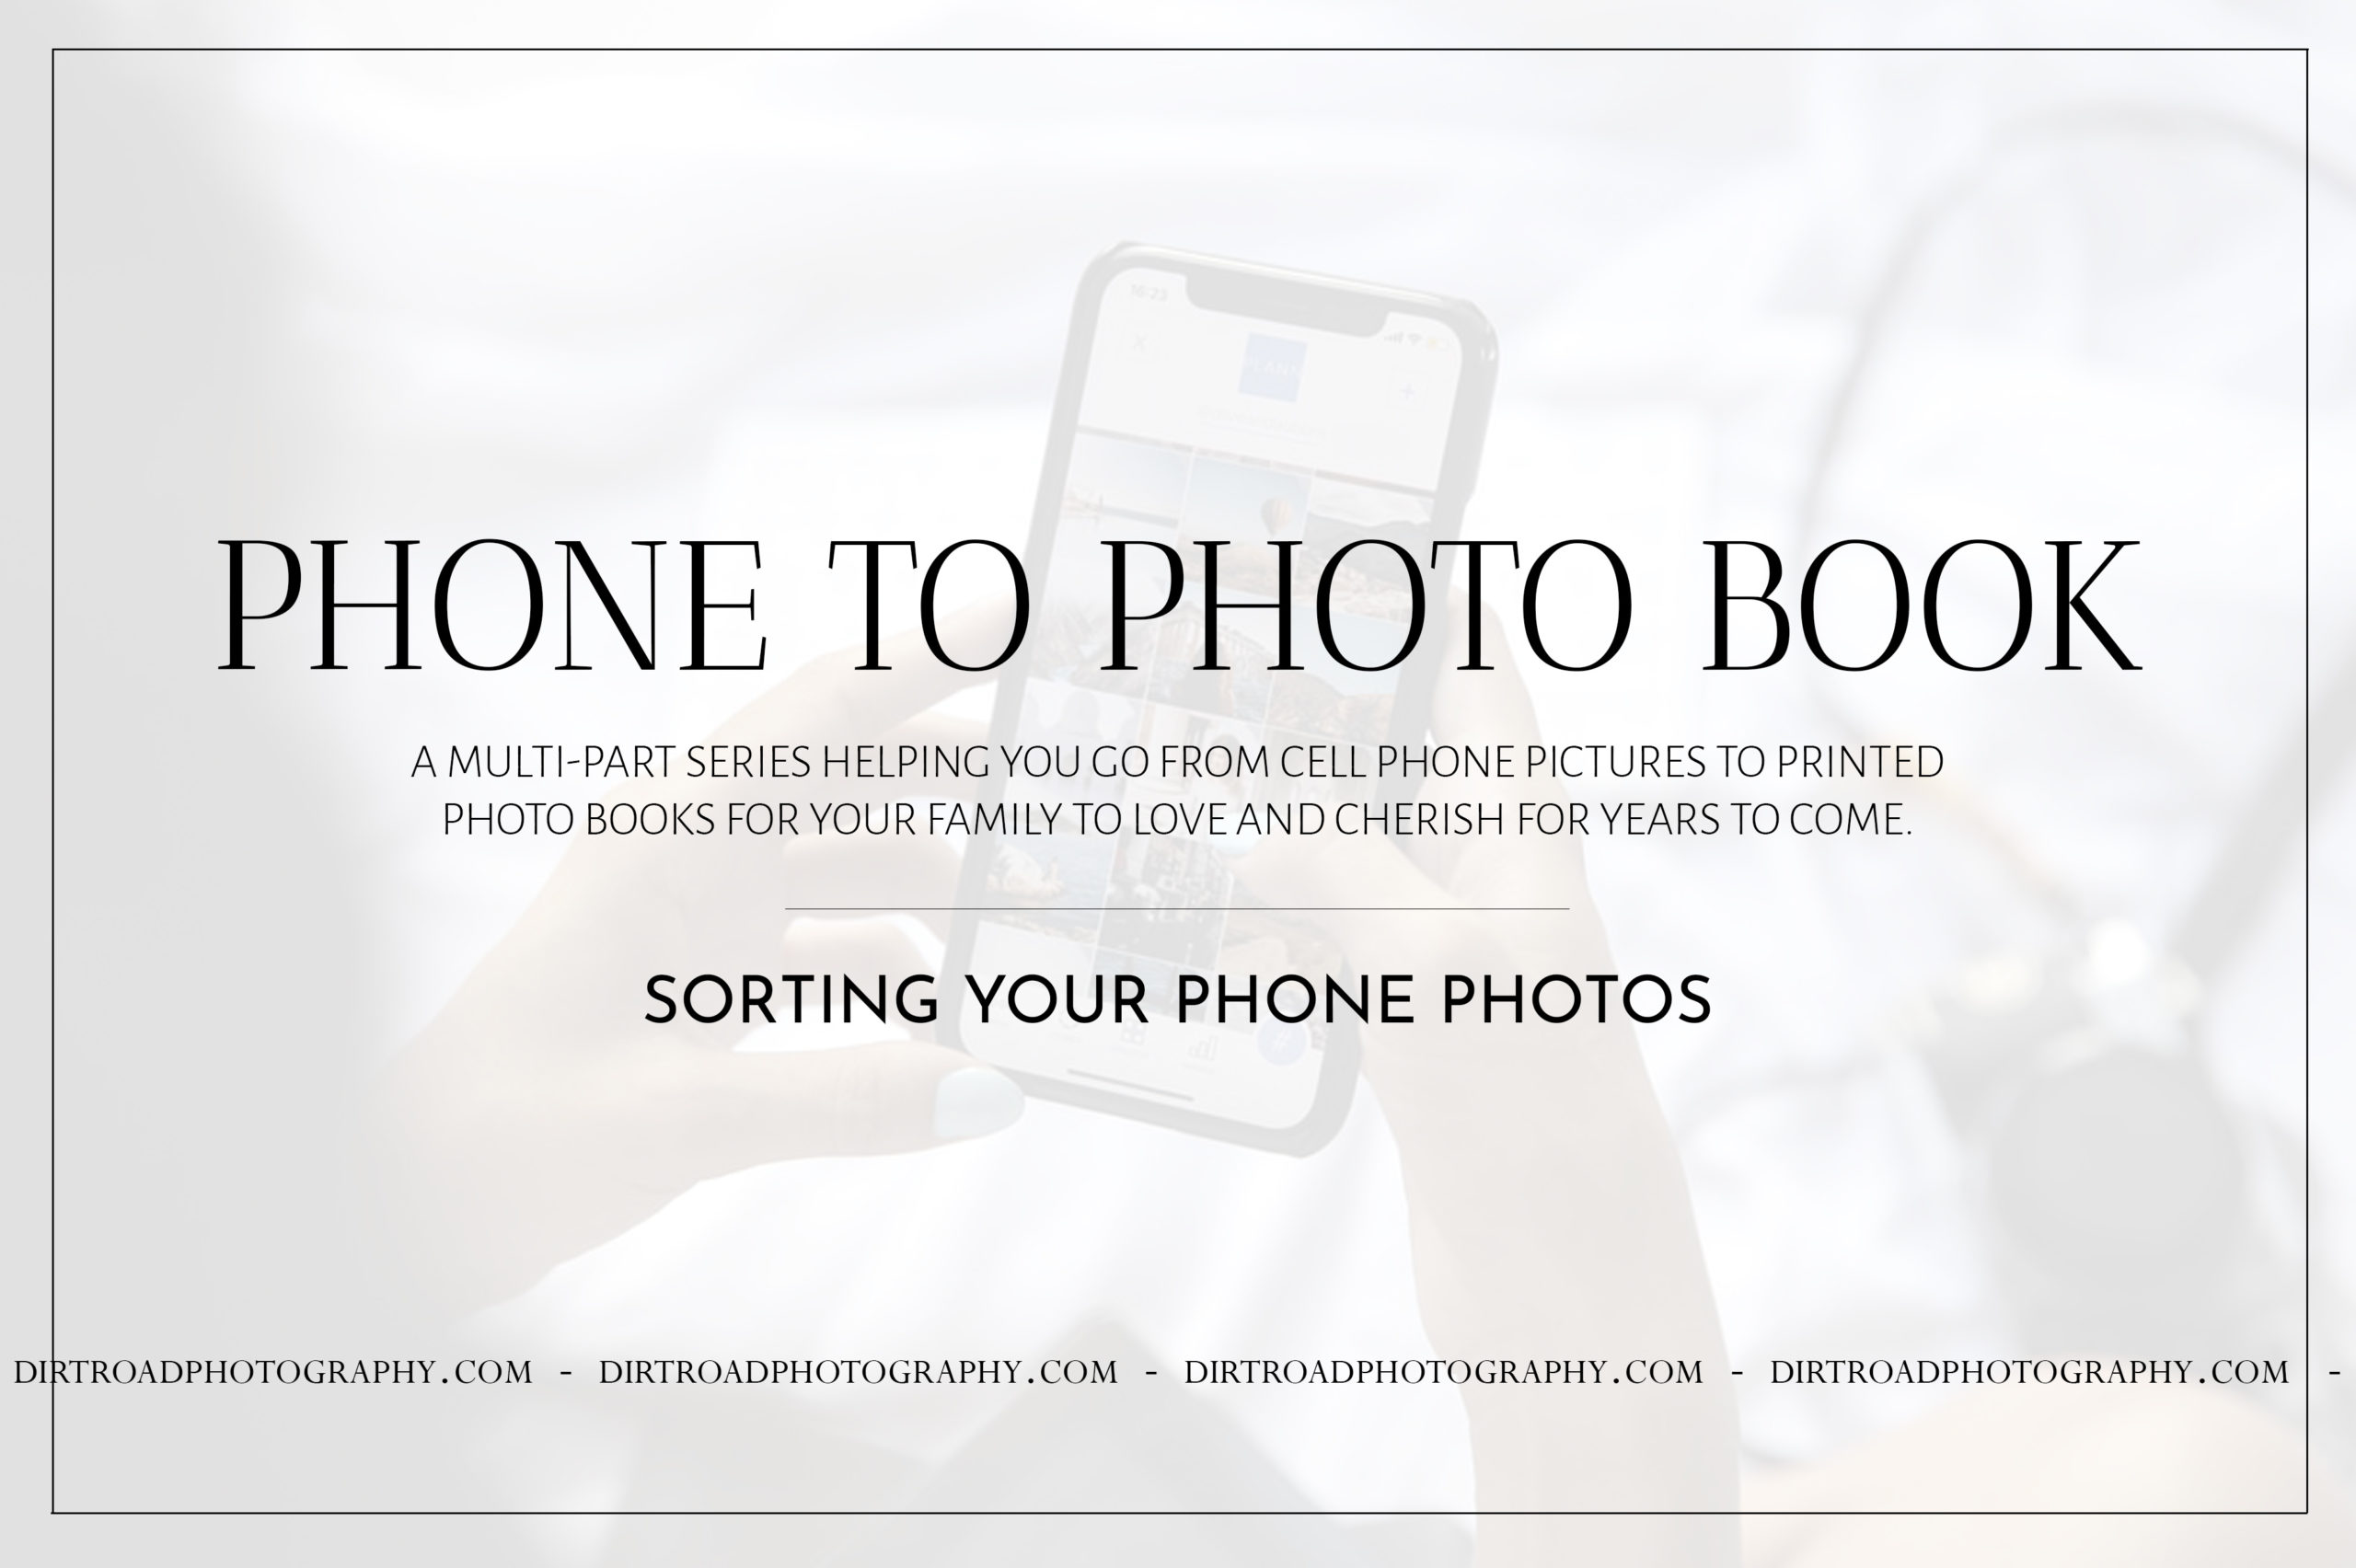 designing your book, phone to photobook series on how to turn your phone photos into photo books.